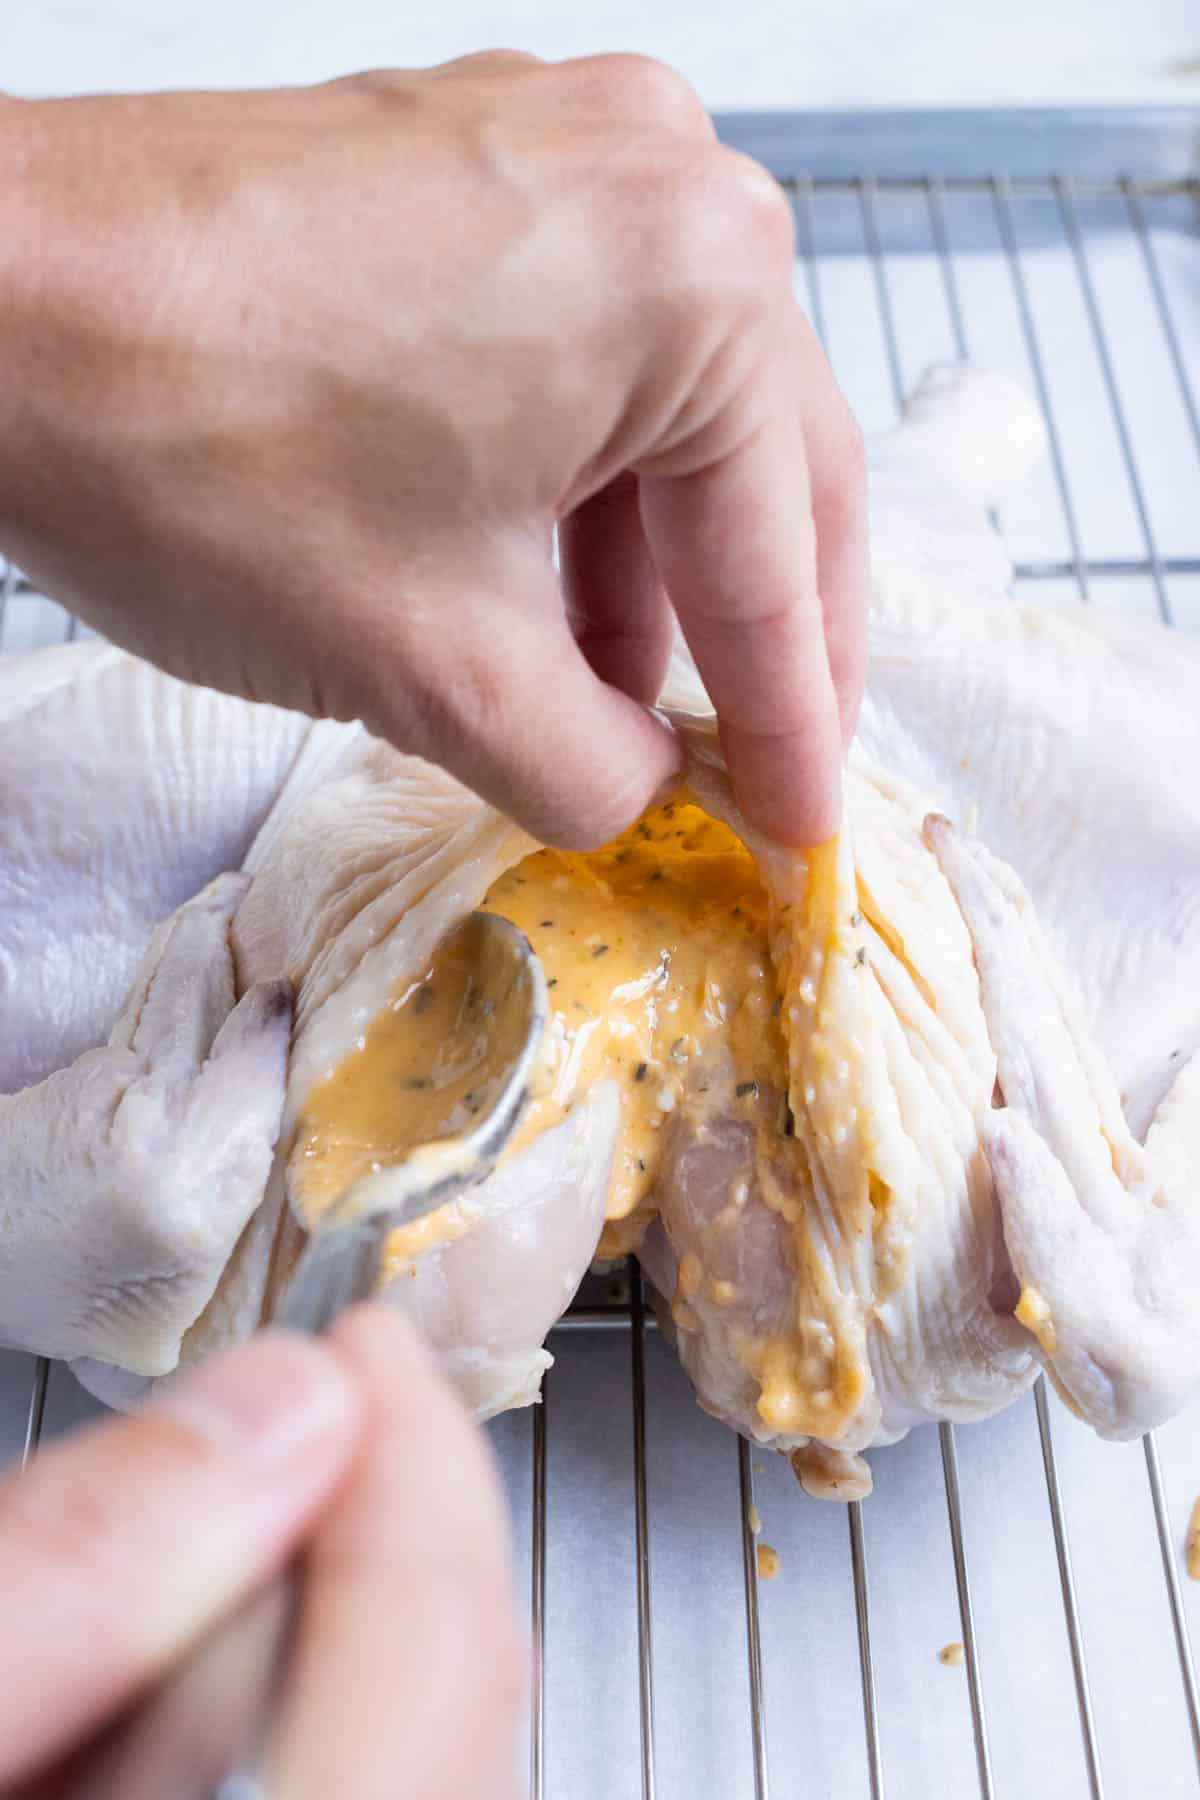 Seasoned butter is pressed under the skin to season a chicken.